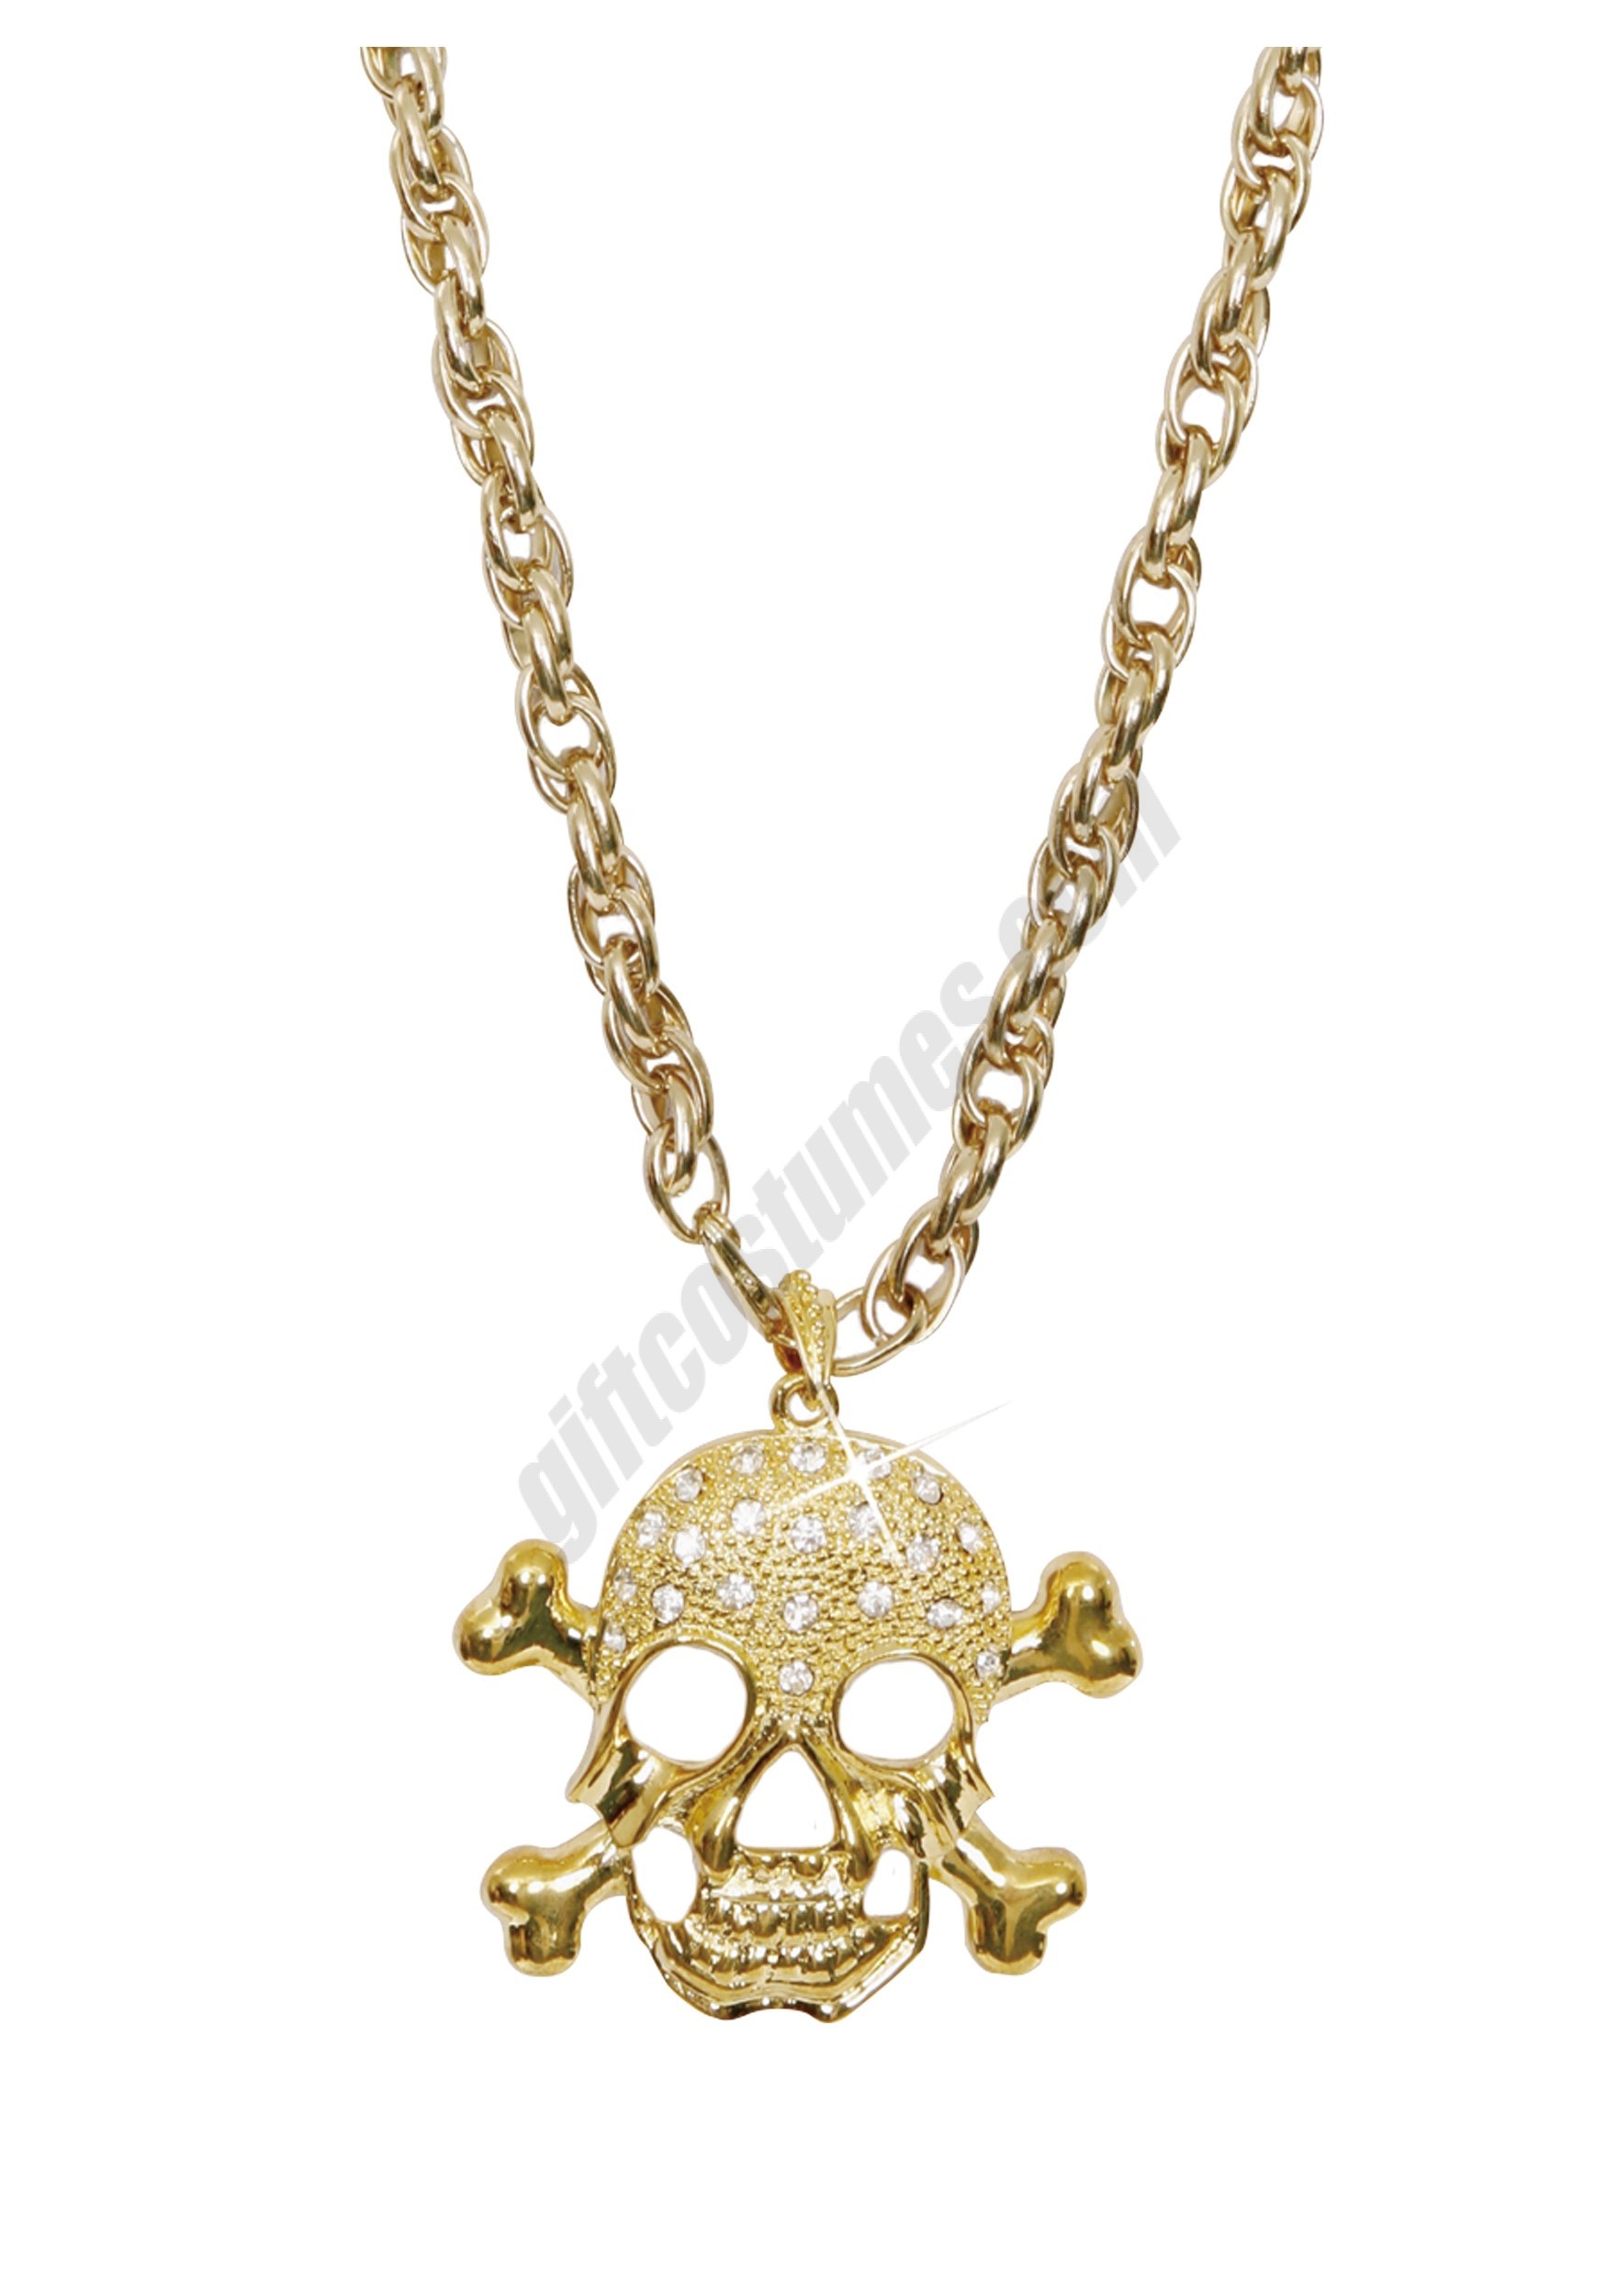 Gold Pirate Necklace Promotions - Gold Pirate Necklace Promotions